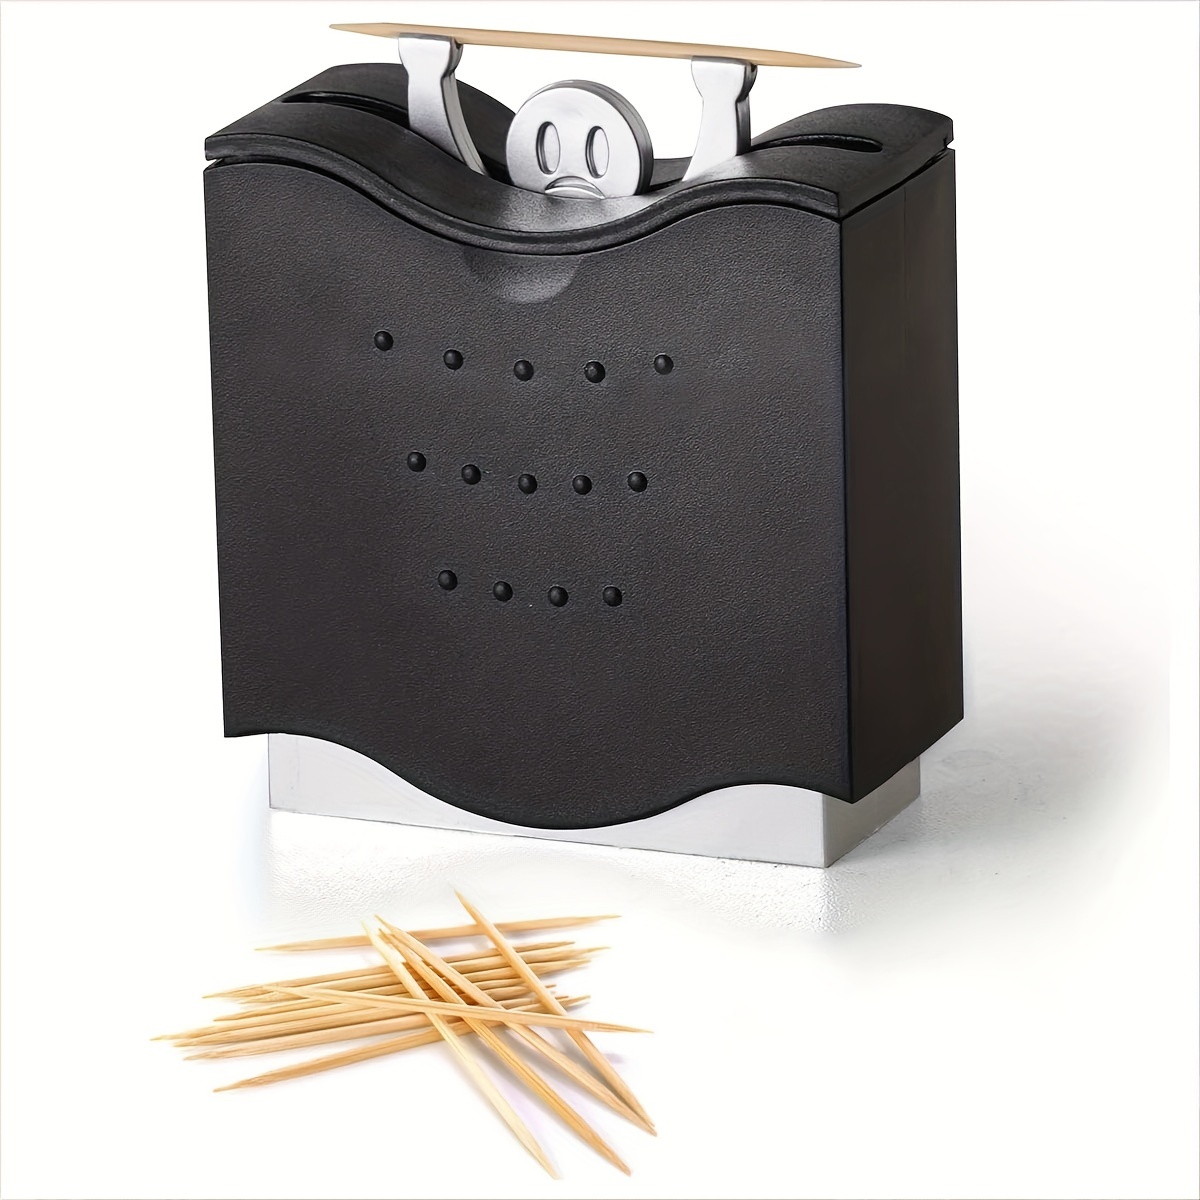 

Black Abs Plastic Toothpick Holder Dispenser - Decorative Cute Fun Toothpick Holders For Home And Office Use